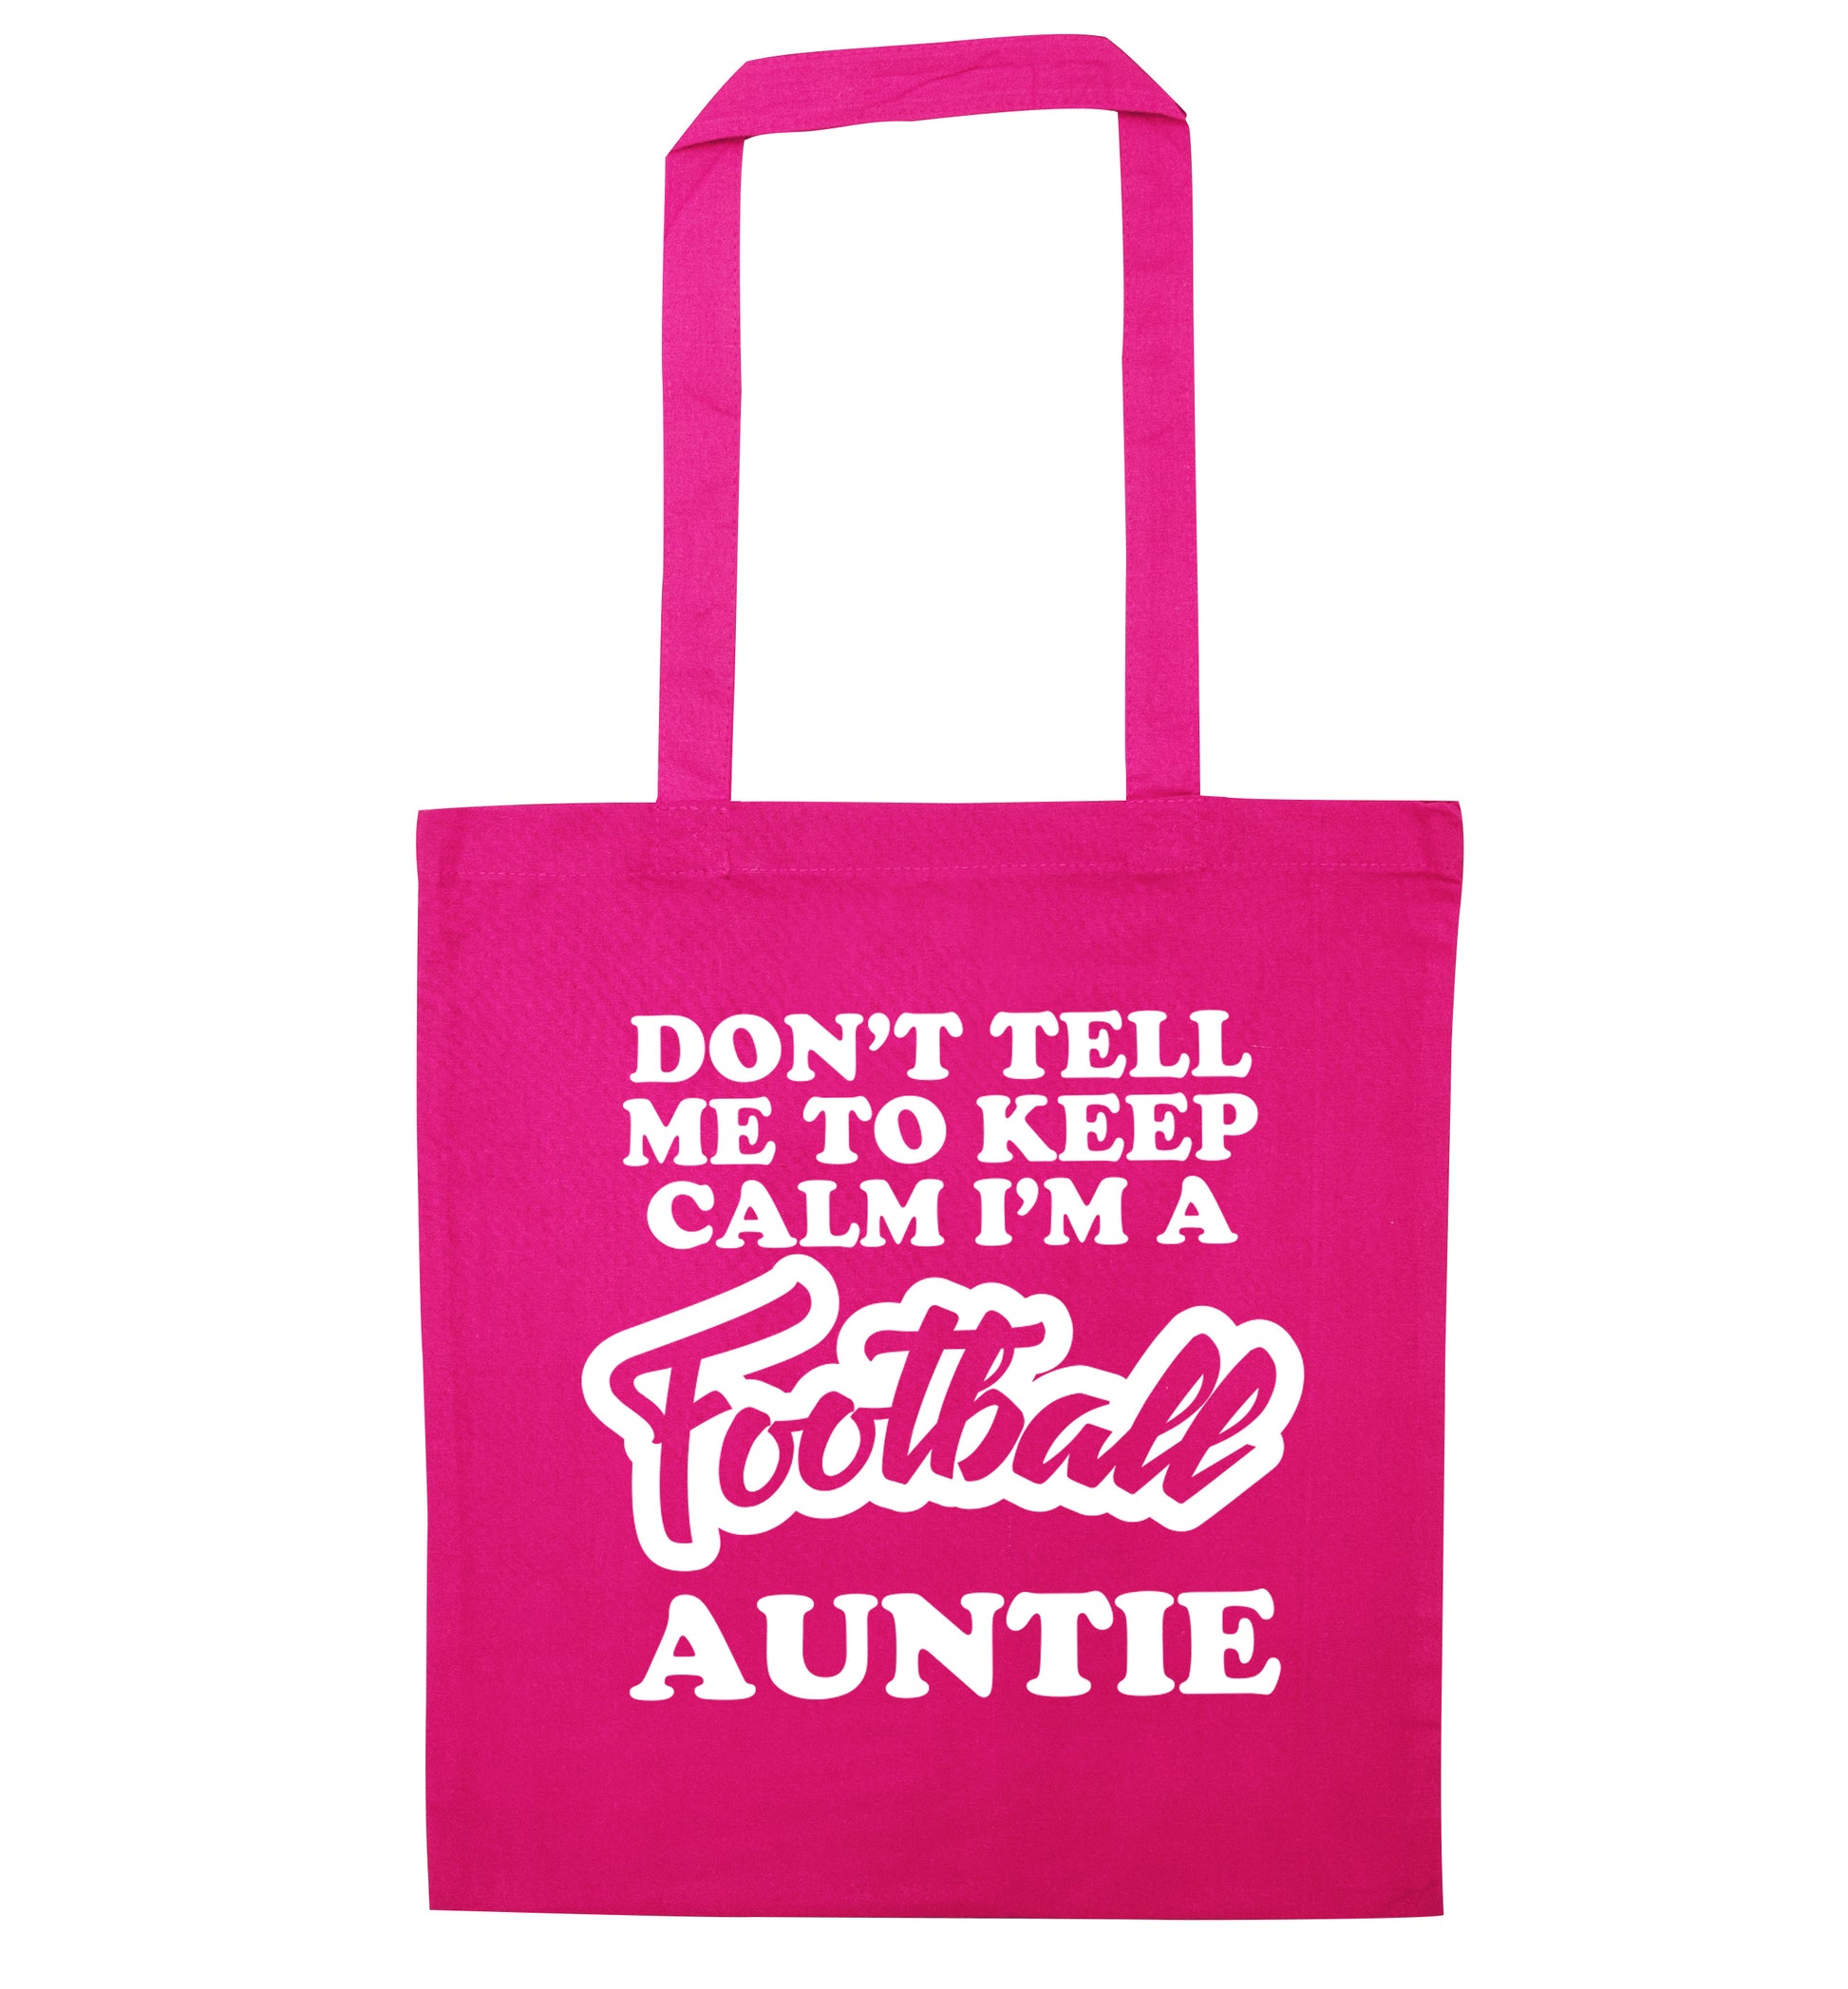 Don't tell me to keep calm I'm a football auntie pink tote bag